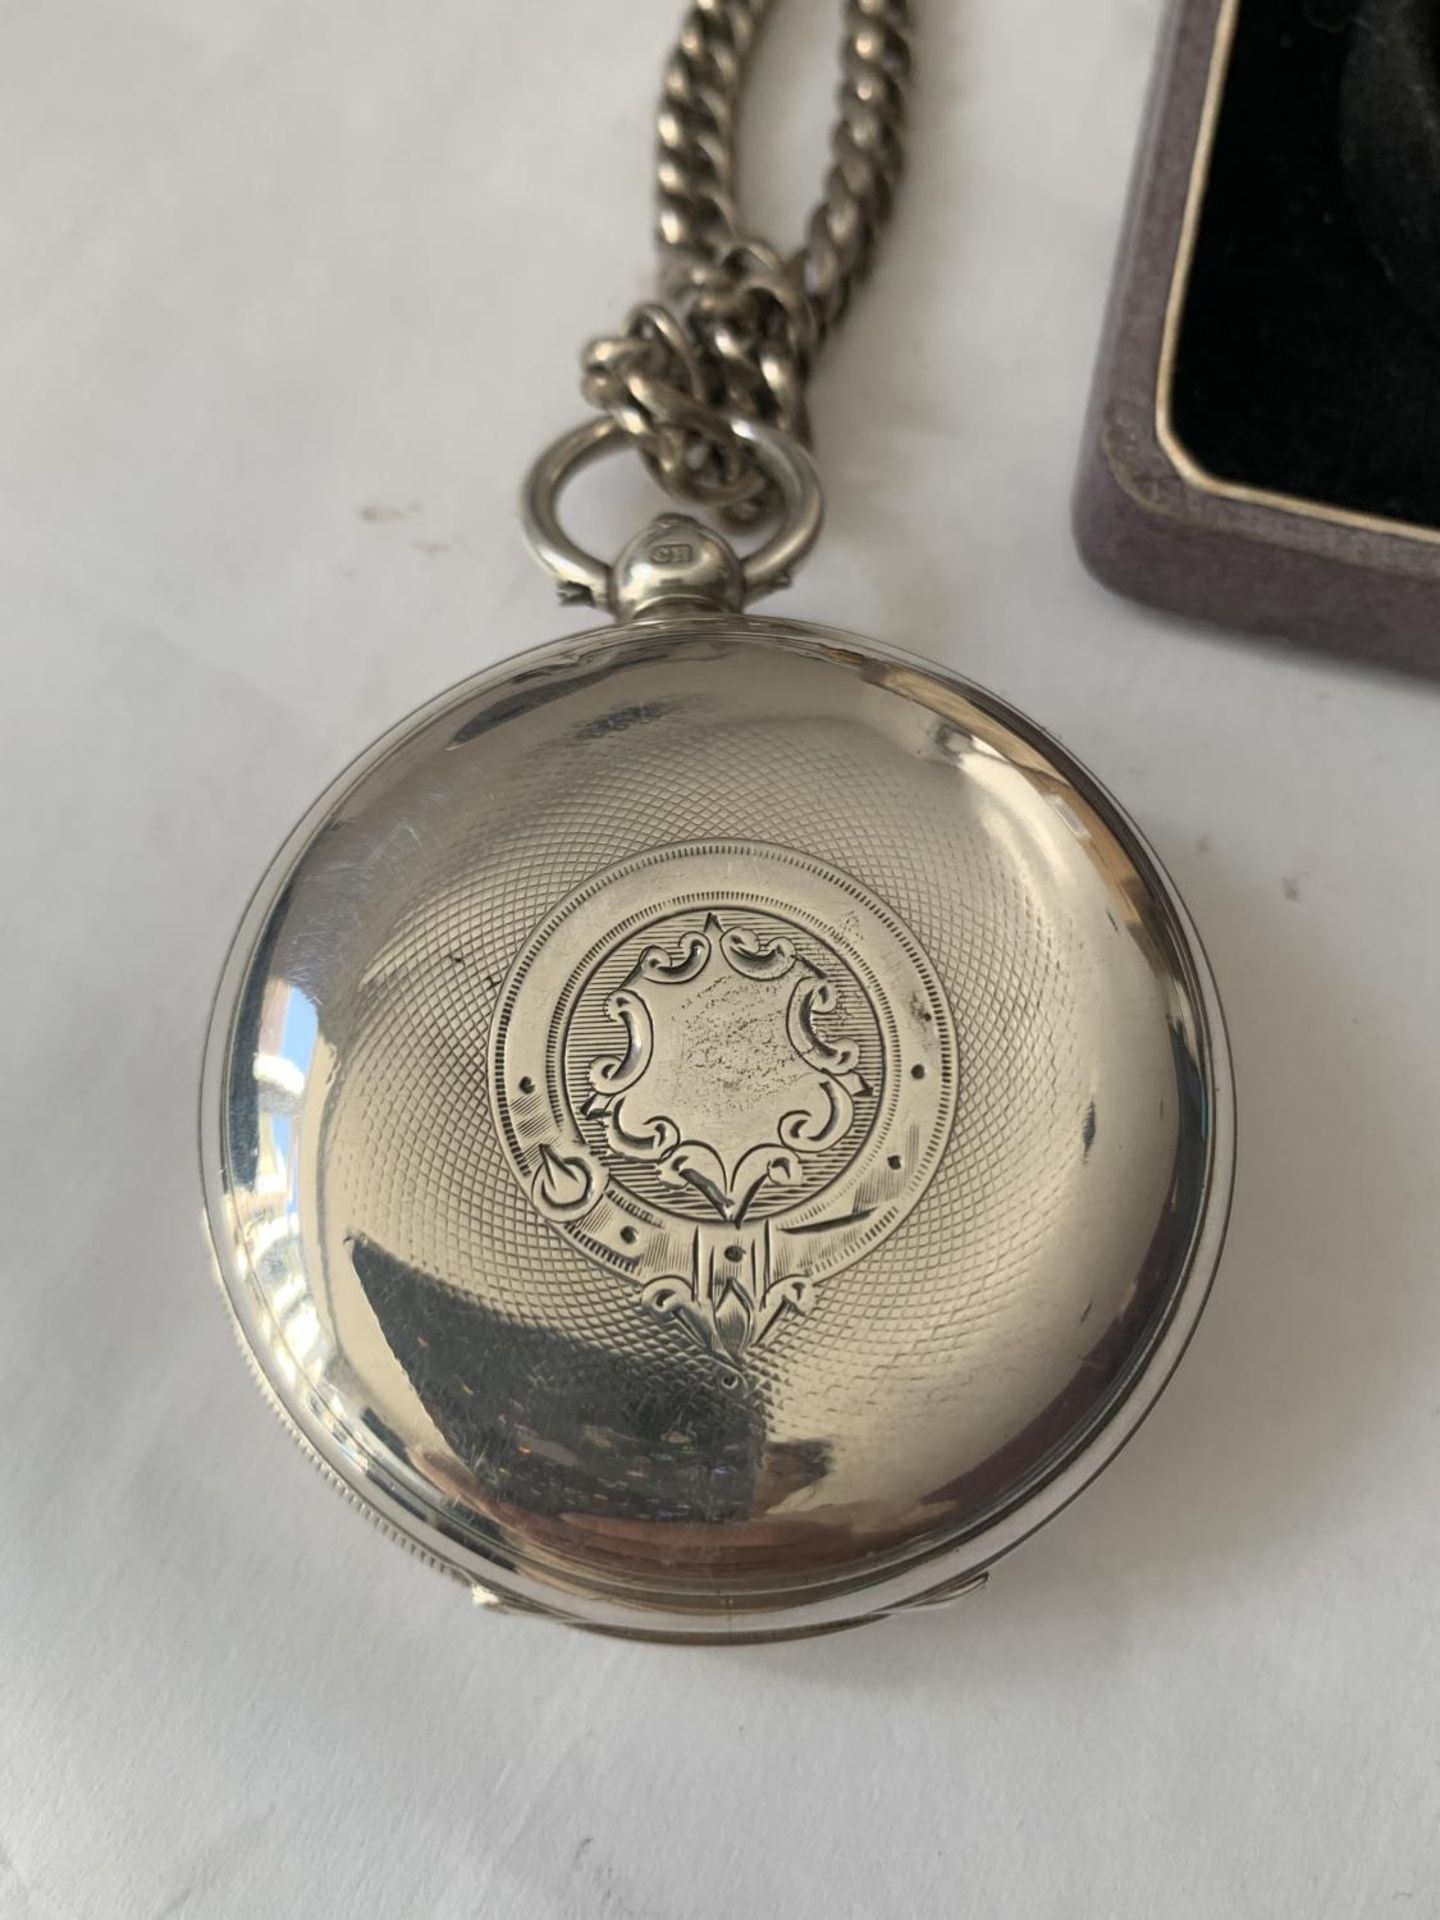 A HALLMARKED LONDON SILVER BARNET AND SCOTT HULLPOCKET WATCH WITH A HEAVY MARKED SILVER CHAIN IN A - Image 3 of 4